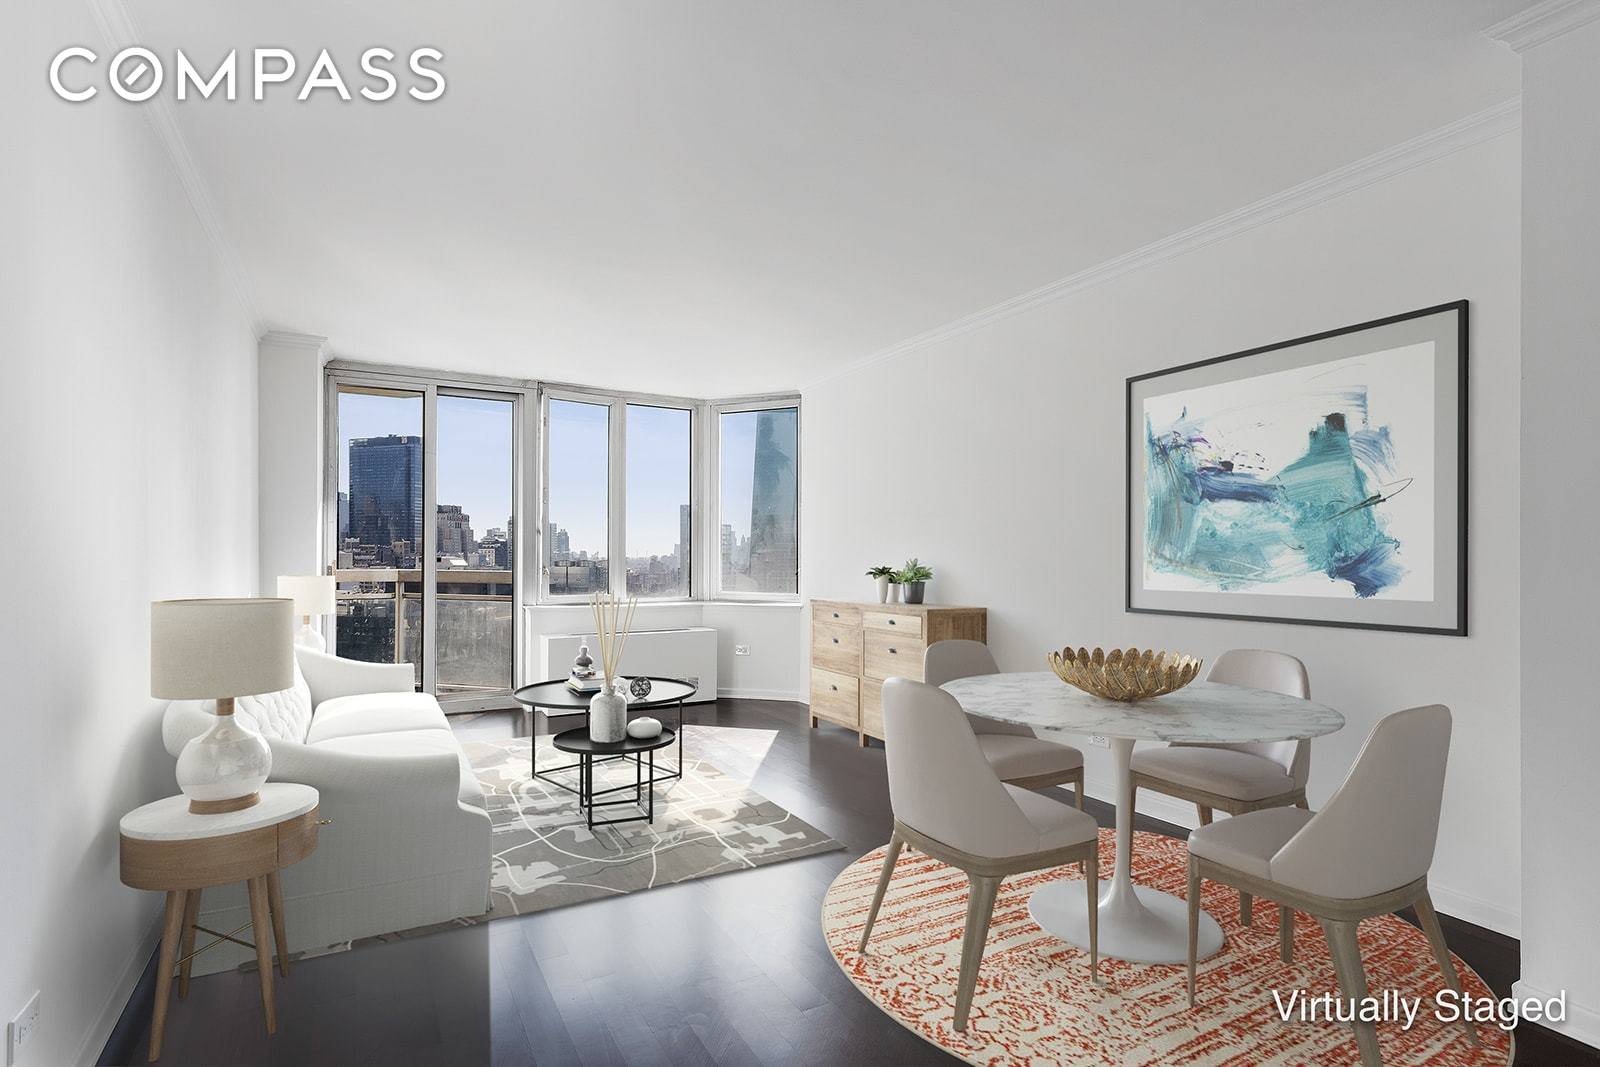 Make your home among the New York City skyline in this Hell's Kitchen one bedroom, one bathroom with breathtaking outdoor space in a full service luxury condominium.